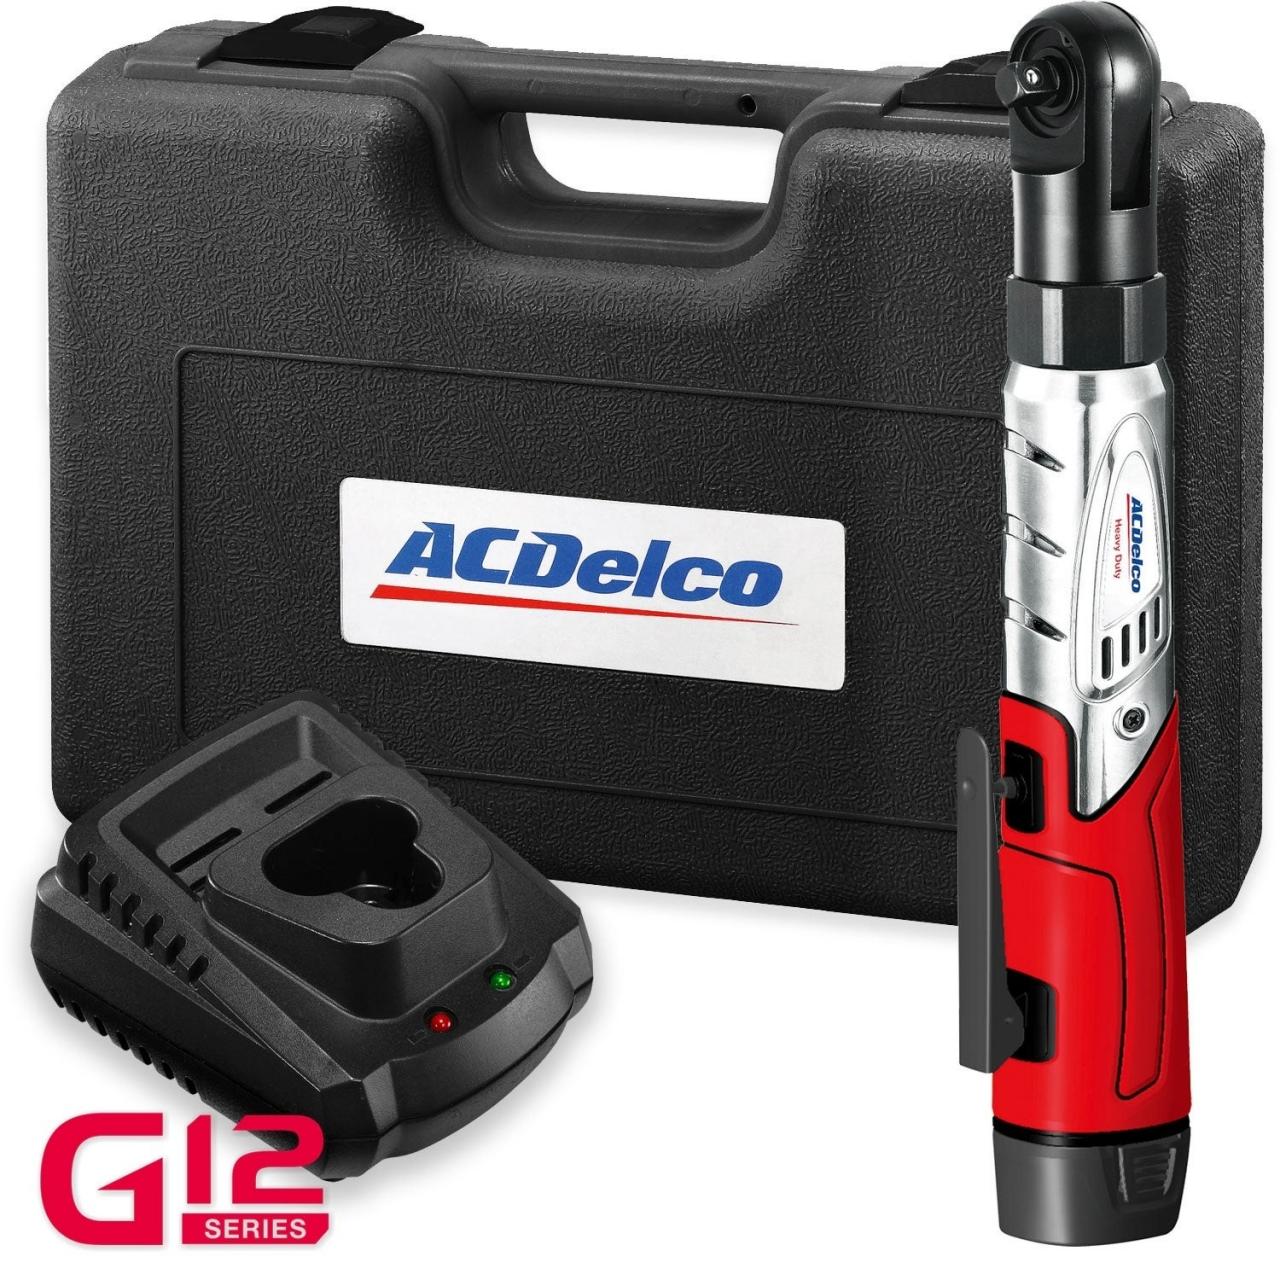 Buy ACDelco ARW1209-K9 G12 Series 12V Li-ion Cordless ¼” & 3/8” Ratchet  Wrench Combo Tool Kit with Canvas Bag Online in Vietnam. B07YYLH5K6